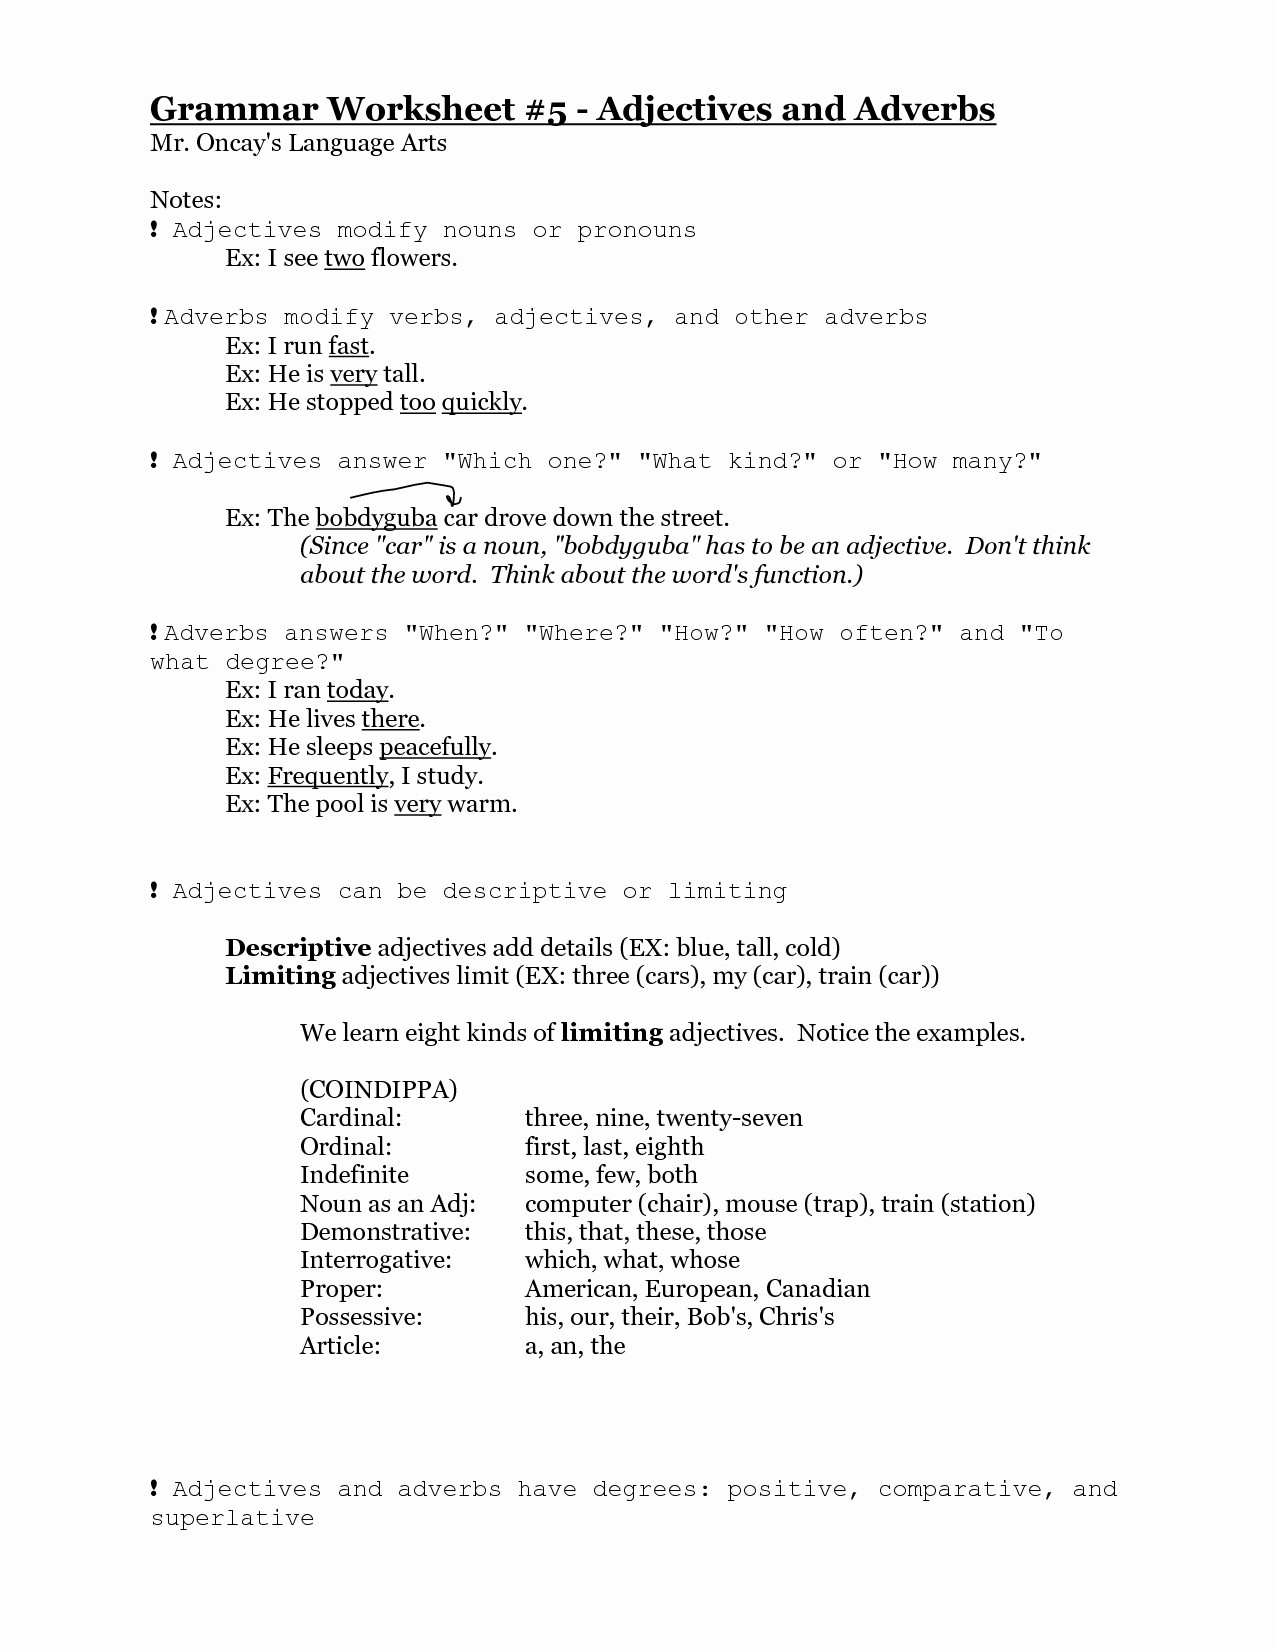 adverbs of frequency worksheet lovely 15 best of adverbs worksheet with answers adverbs frequency of adverbs of frequency worksheet